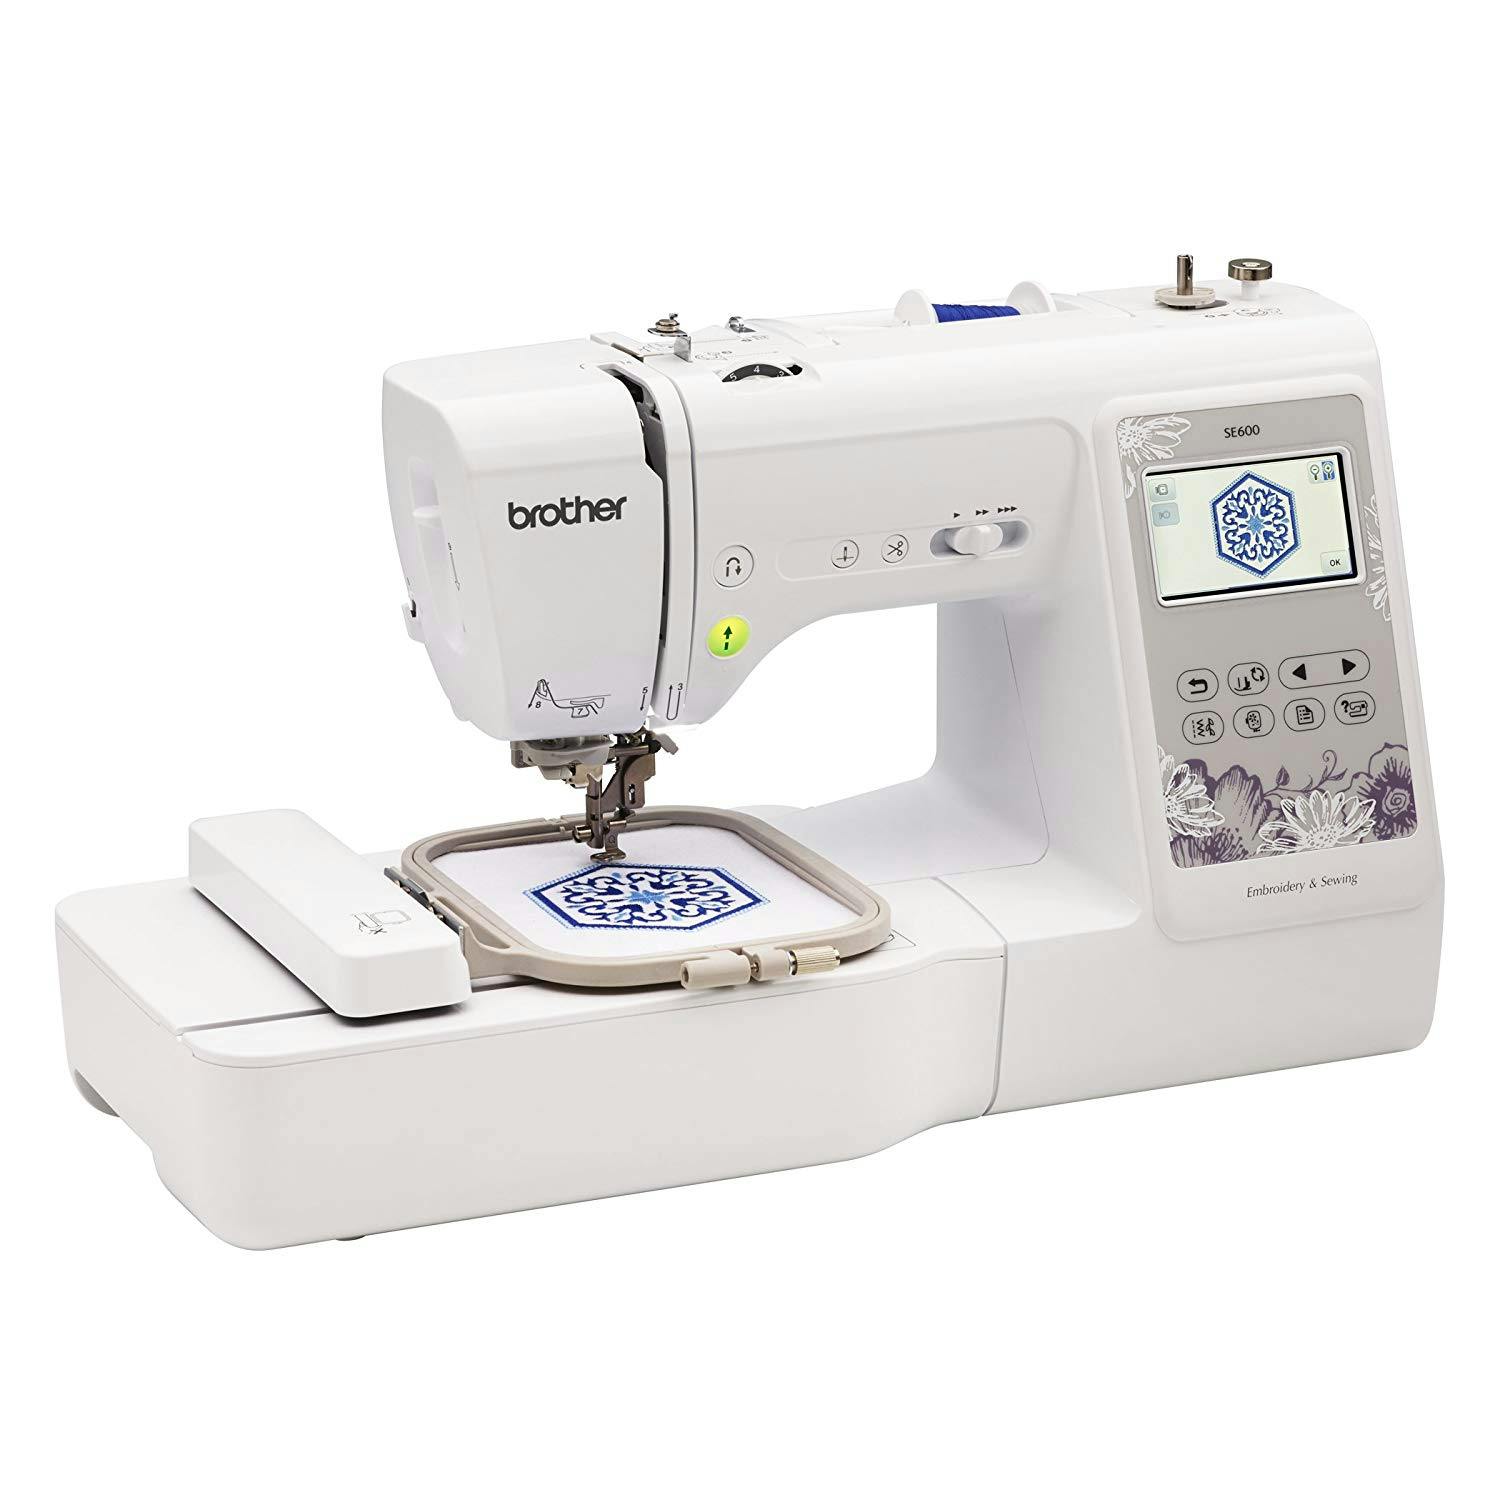 Top 7 Best Brother Embroidery Machines of 2021 [Reviews]  Brother  embroidery machine, Brother embroidery, Best embroidery machine